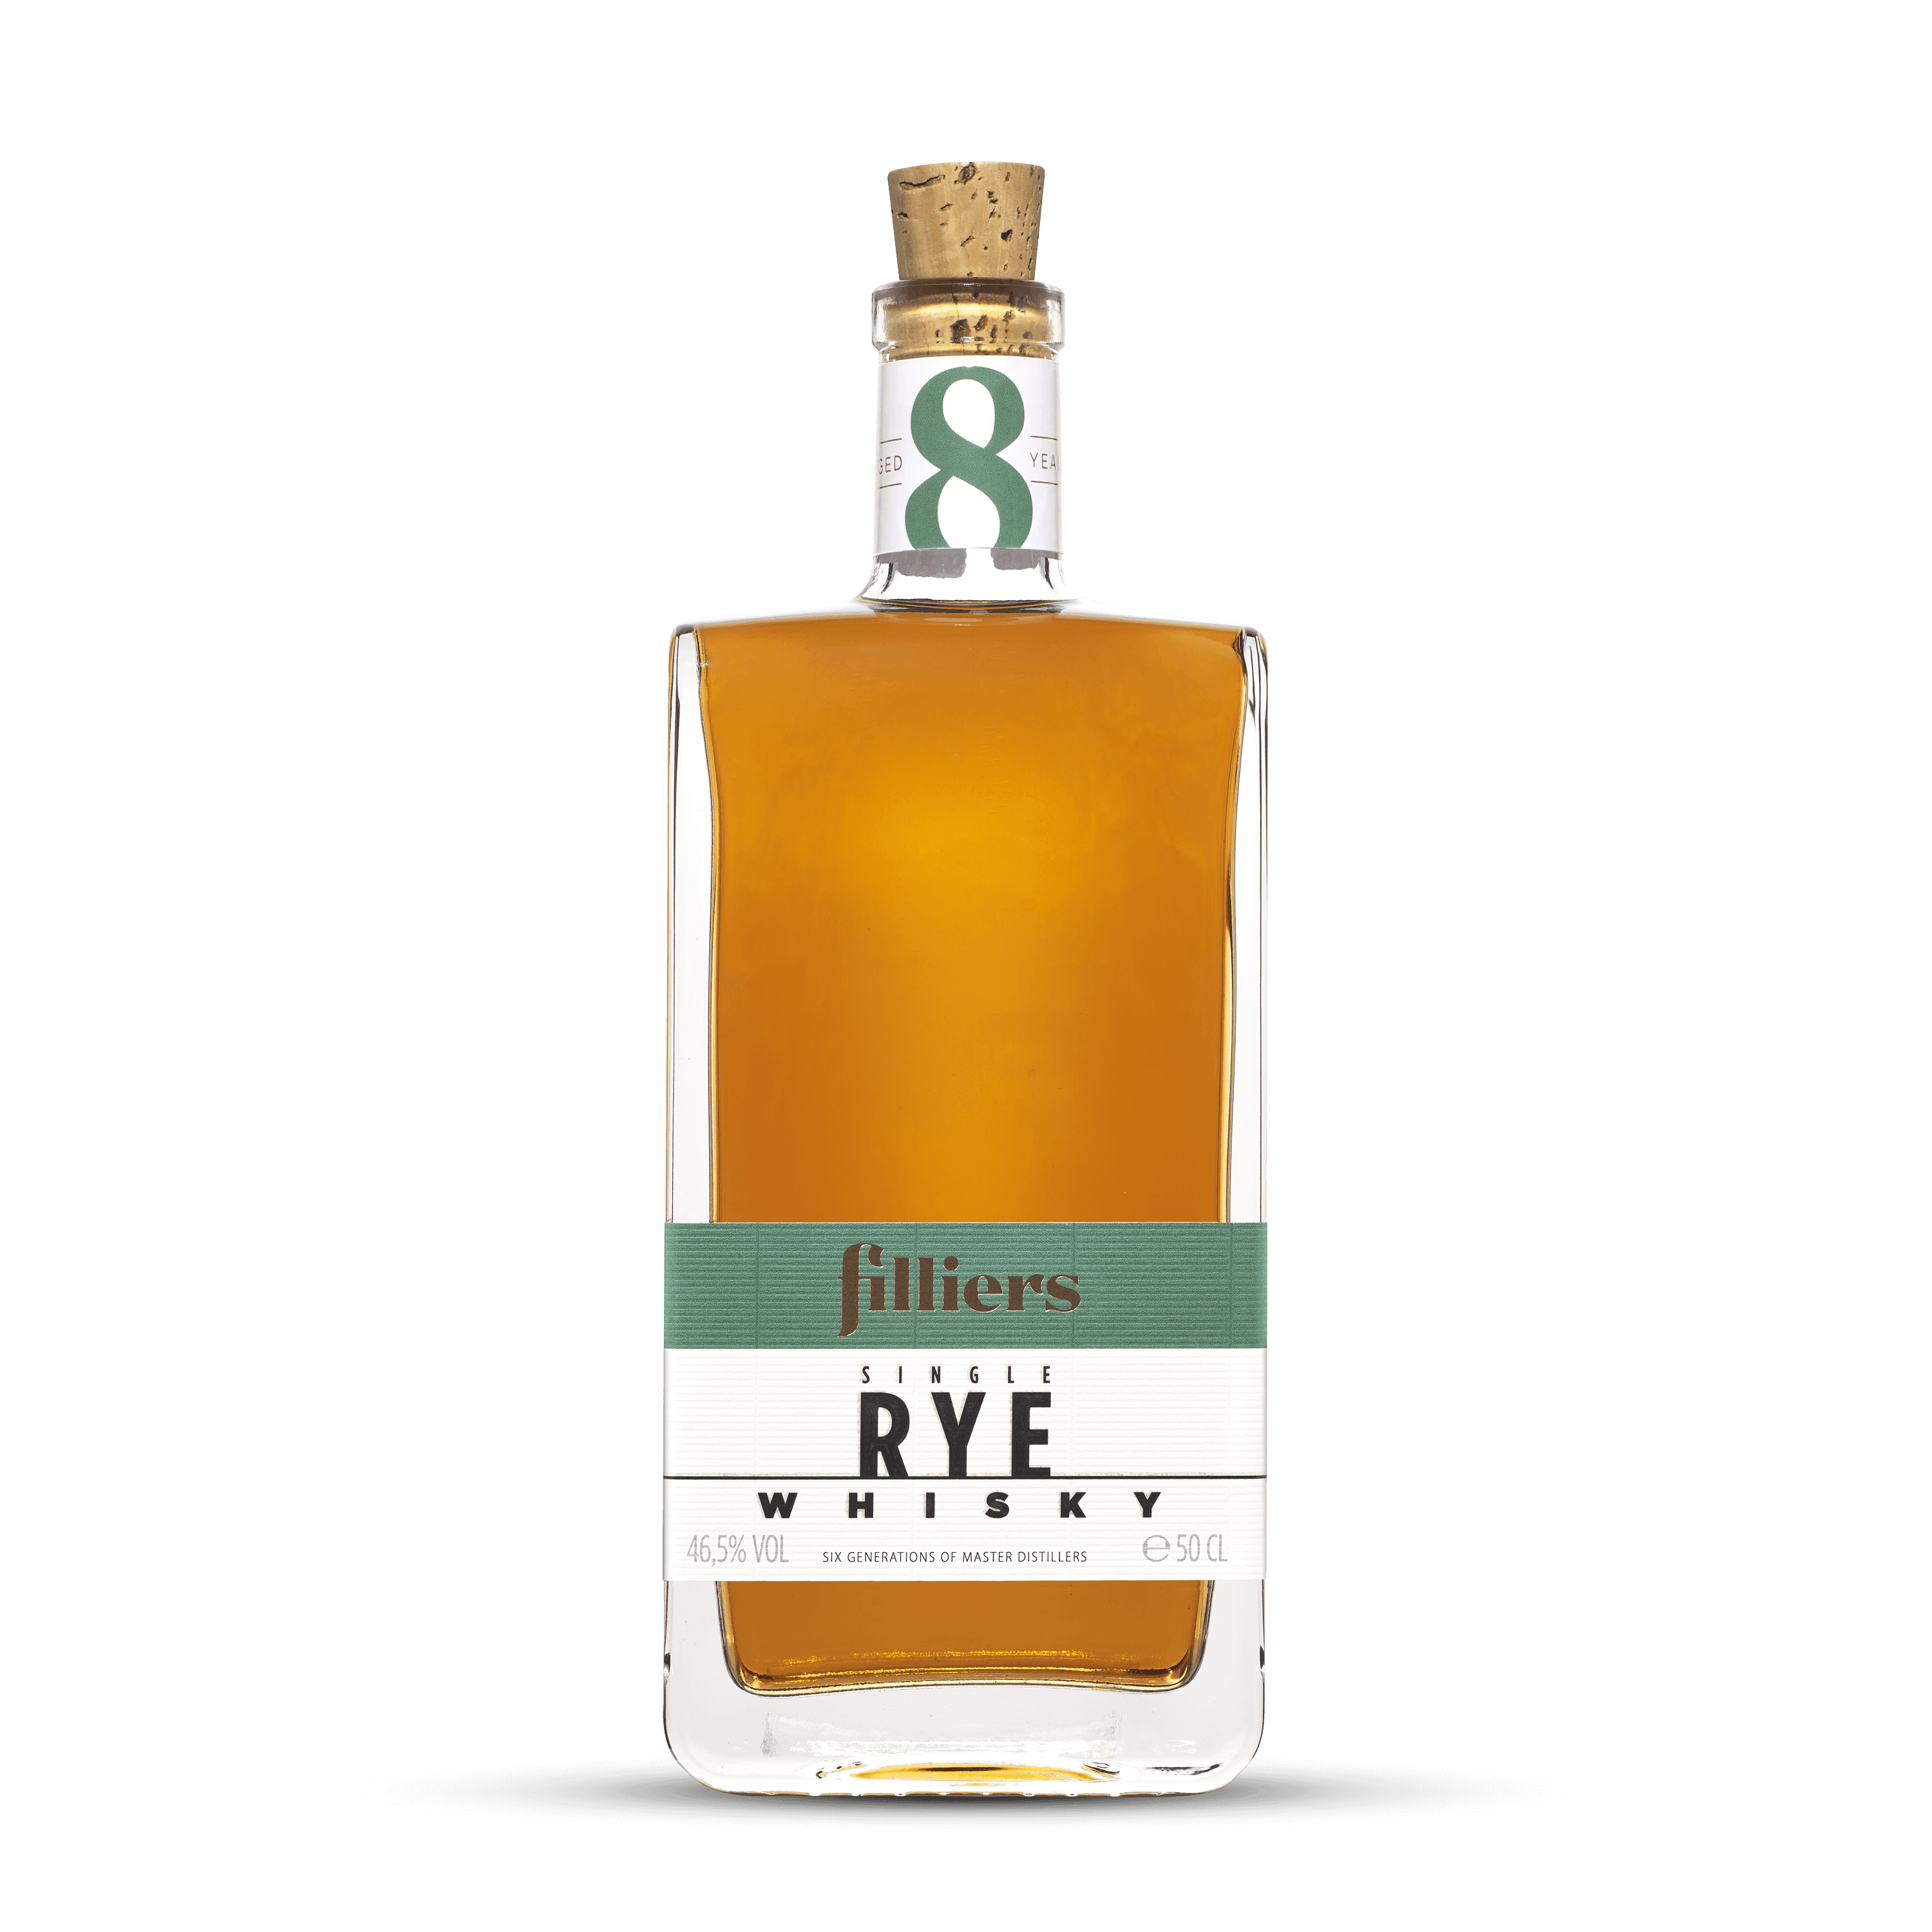 Filliers Single Rye Whisky 46,5% 8 Ans d'age 50Cl.